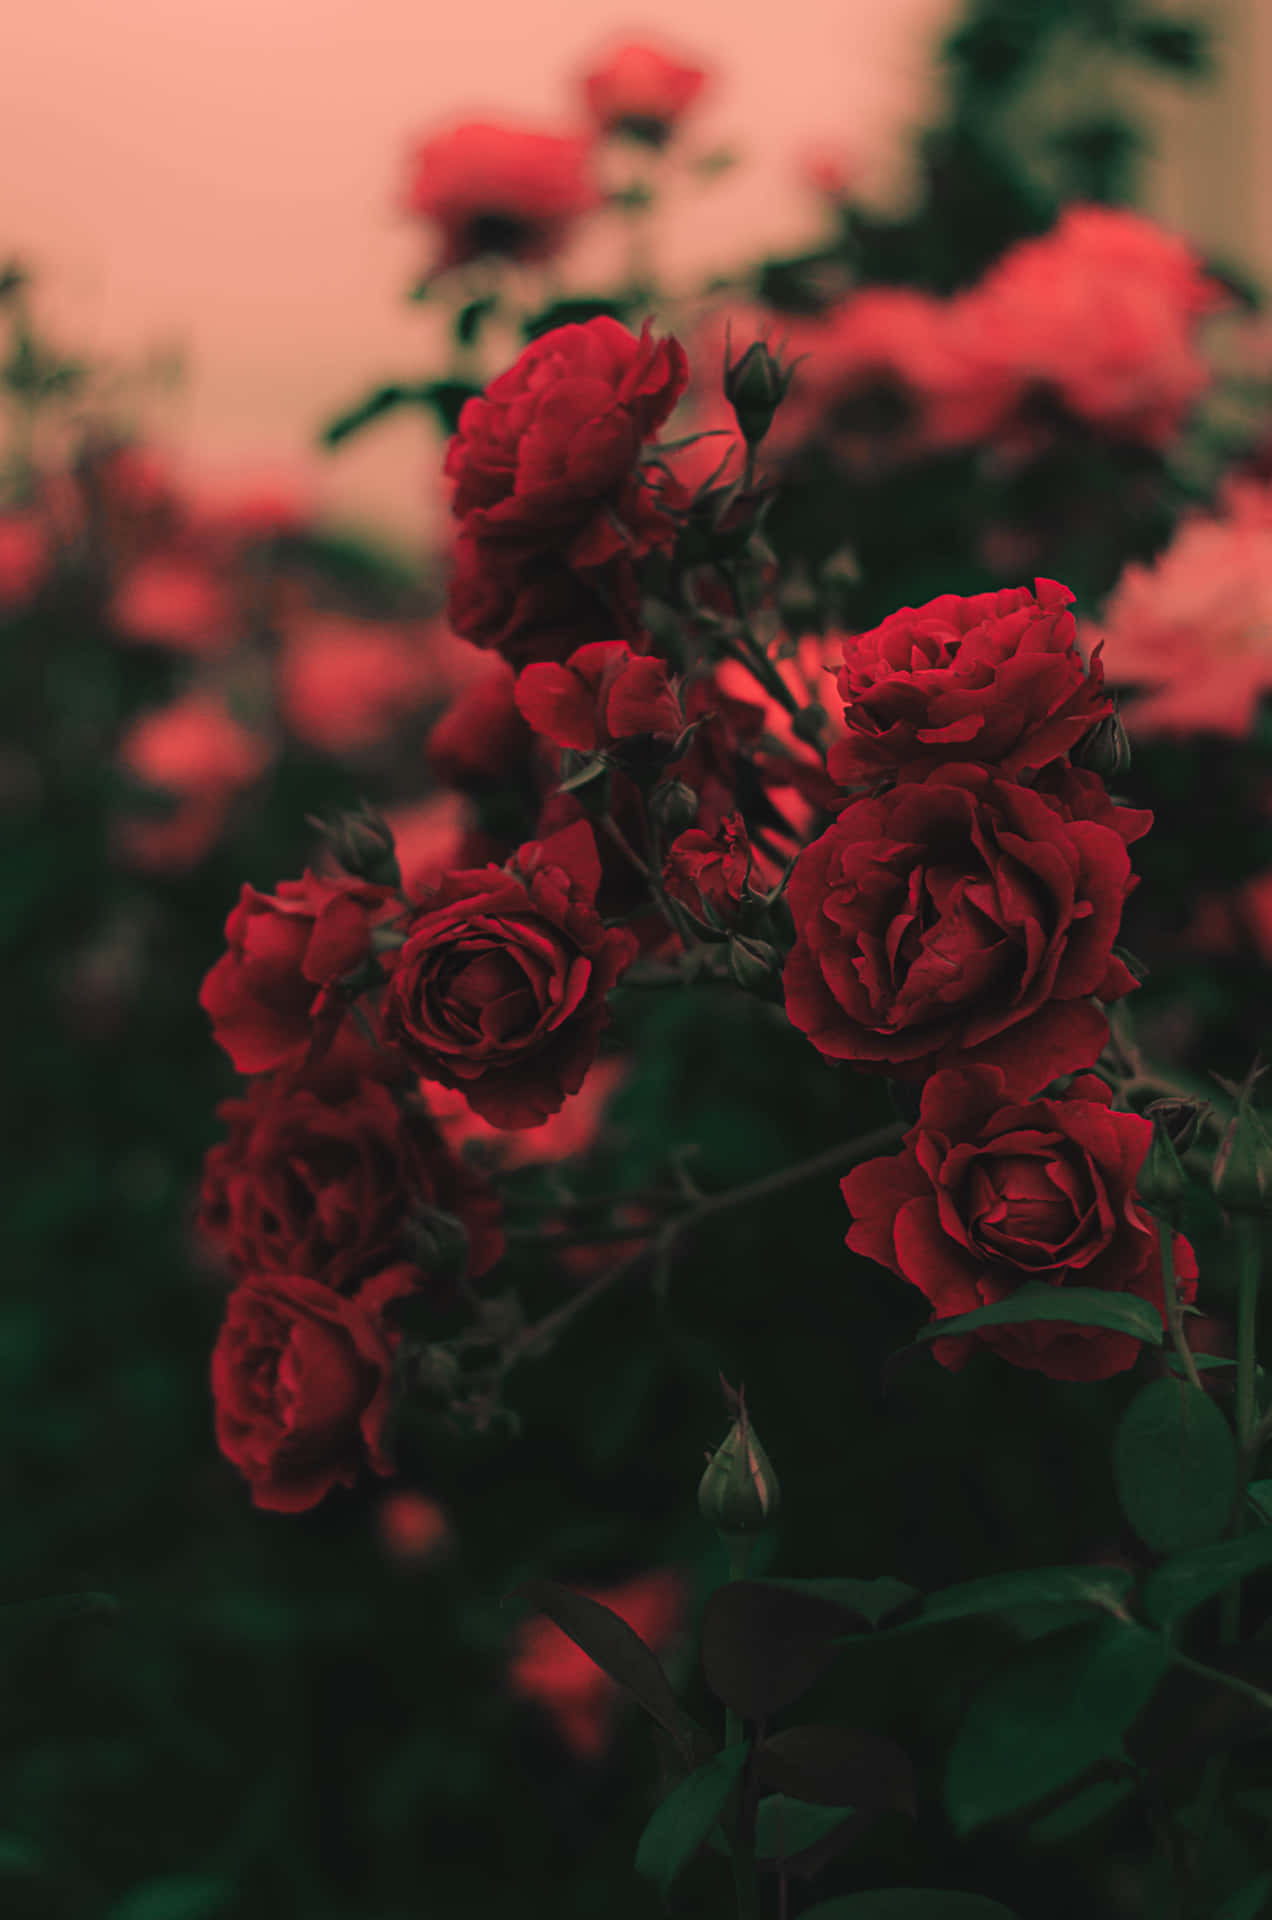 Red Roses Background